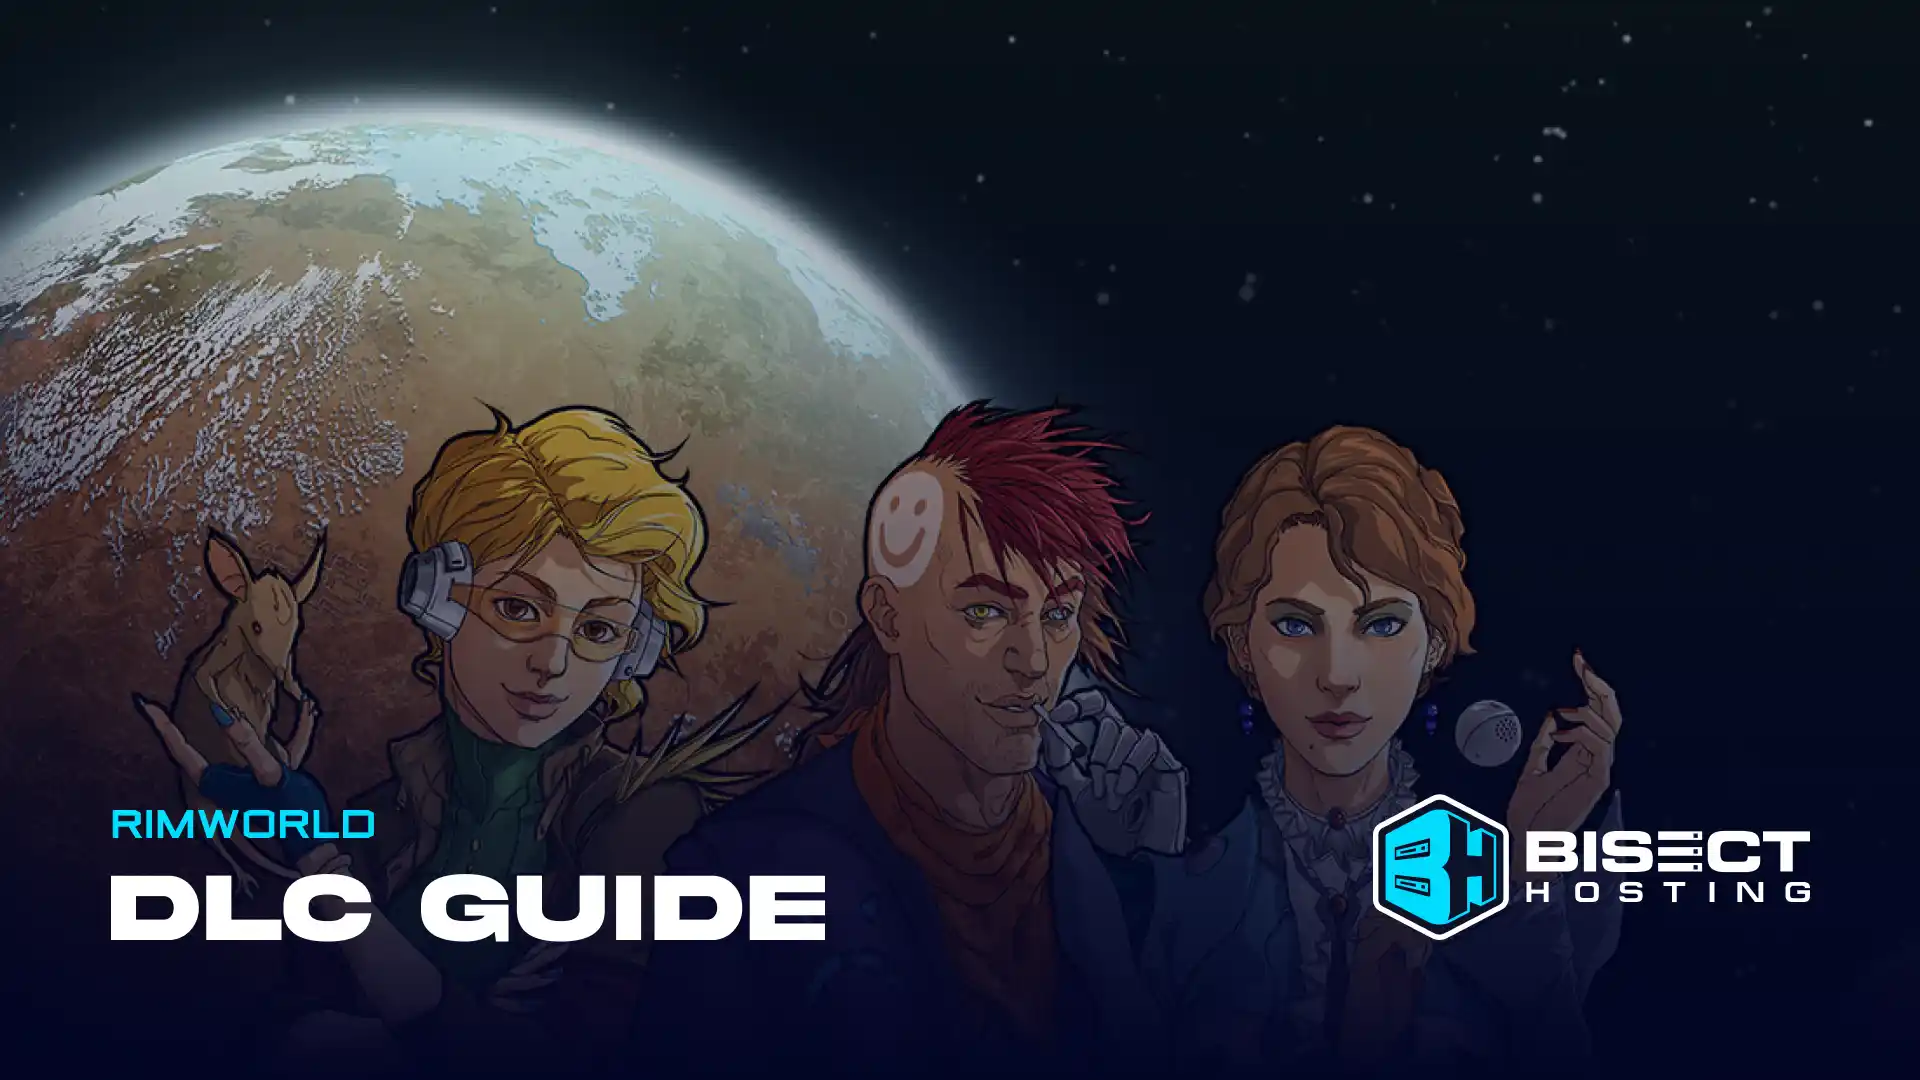 RimWorld DLC Guide: Release Dates, Features, Price, & more